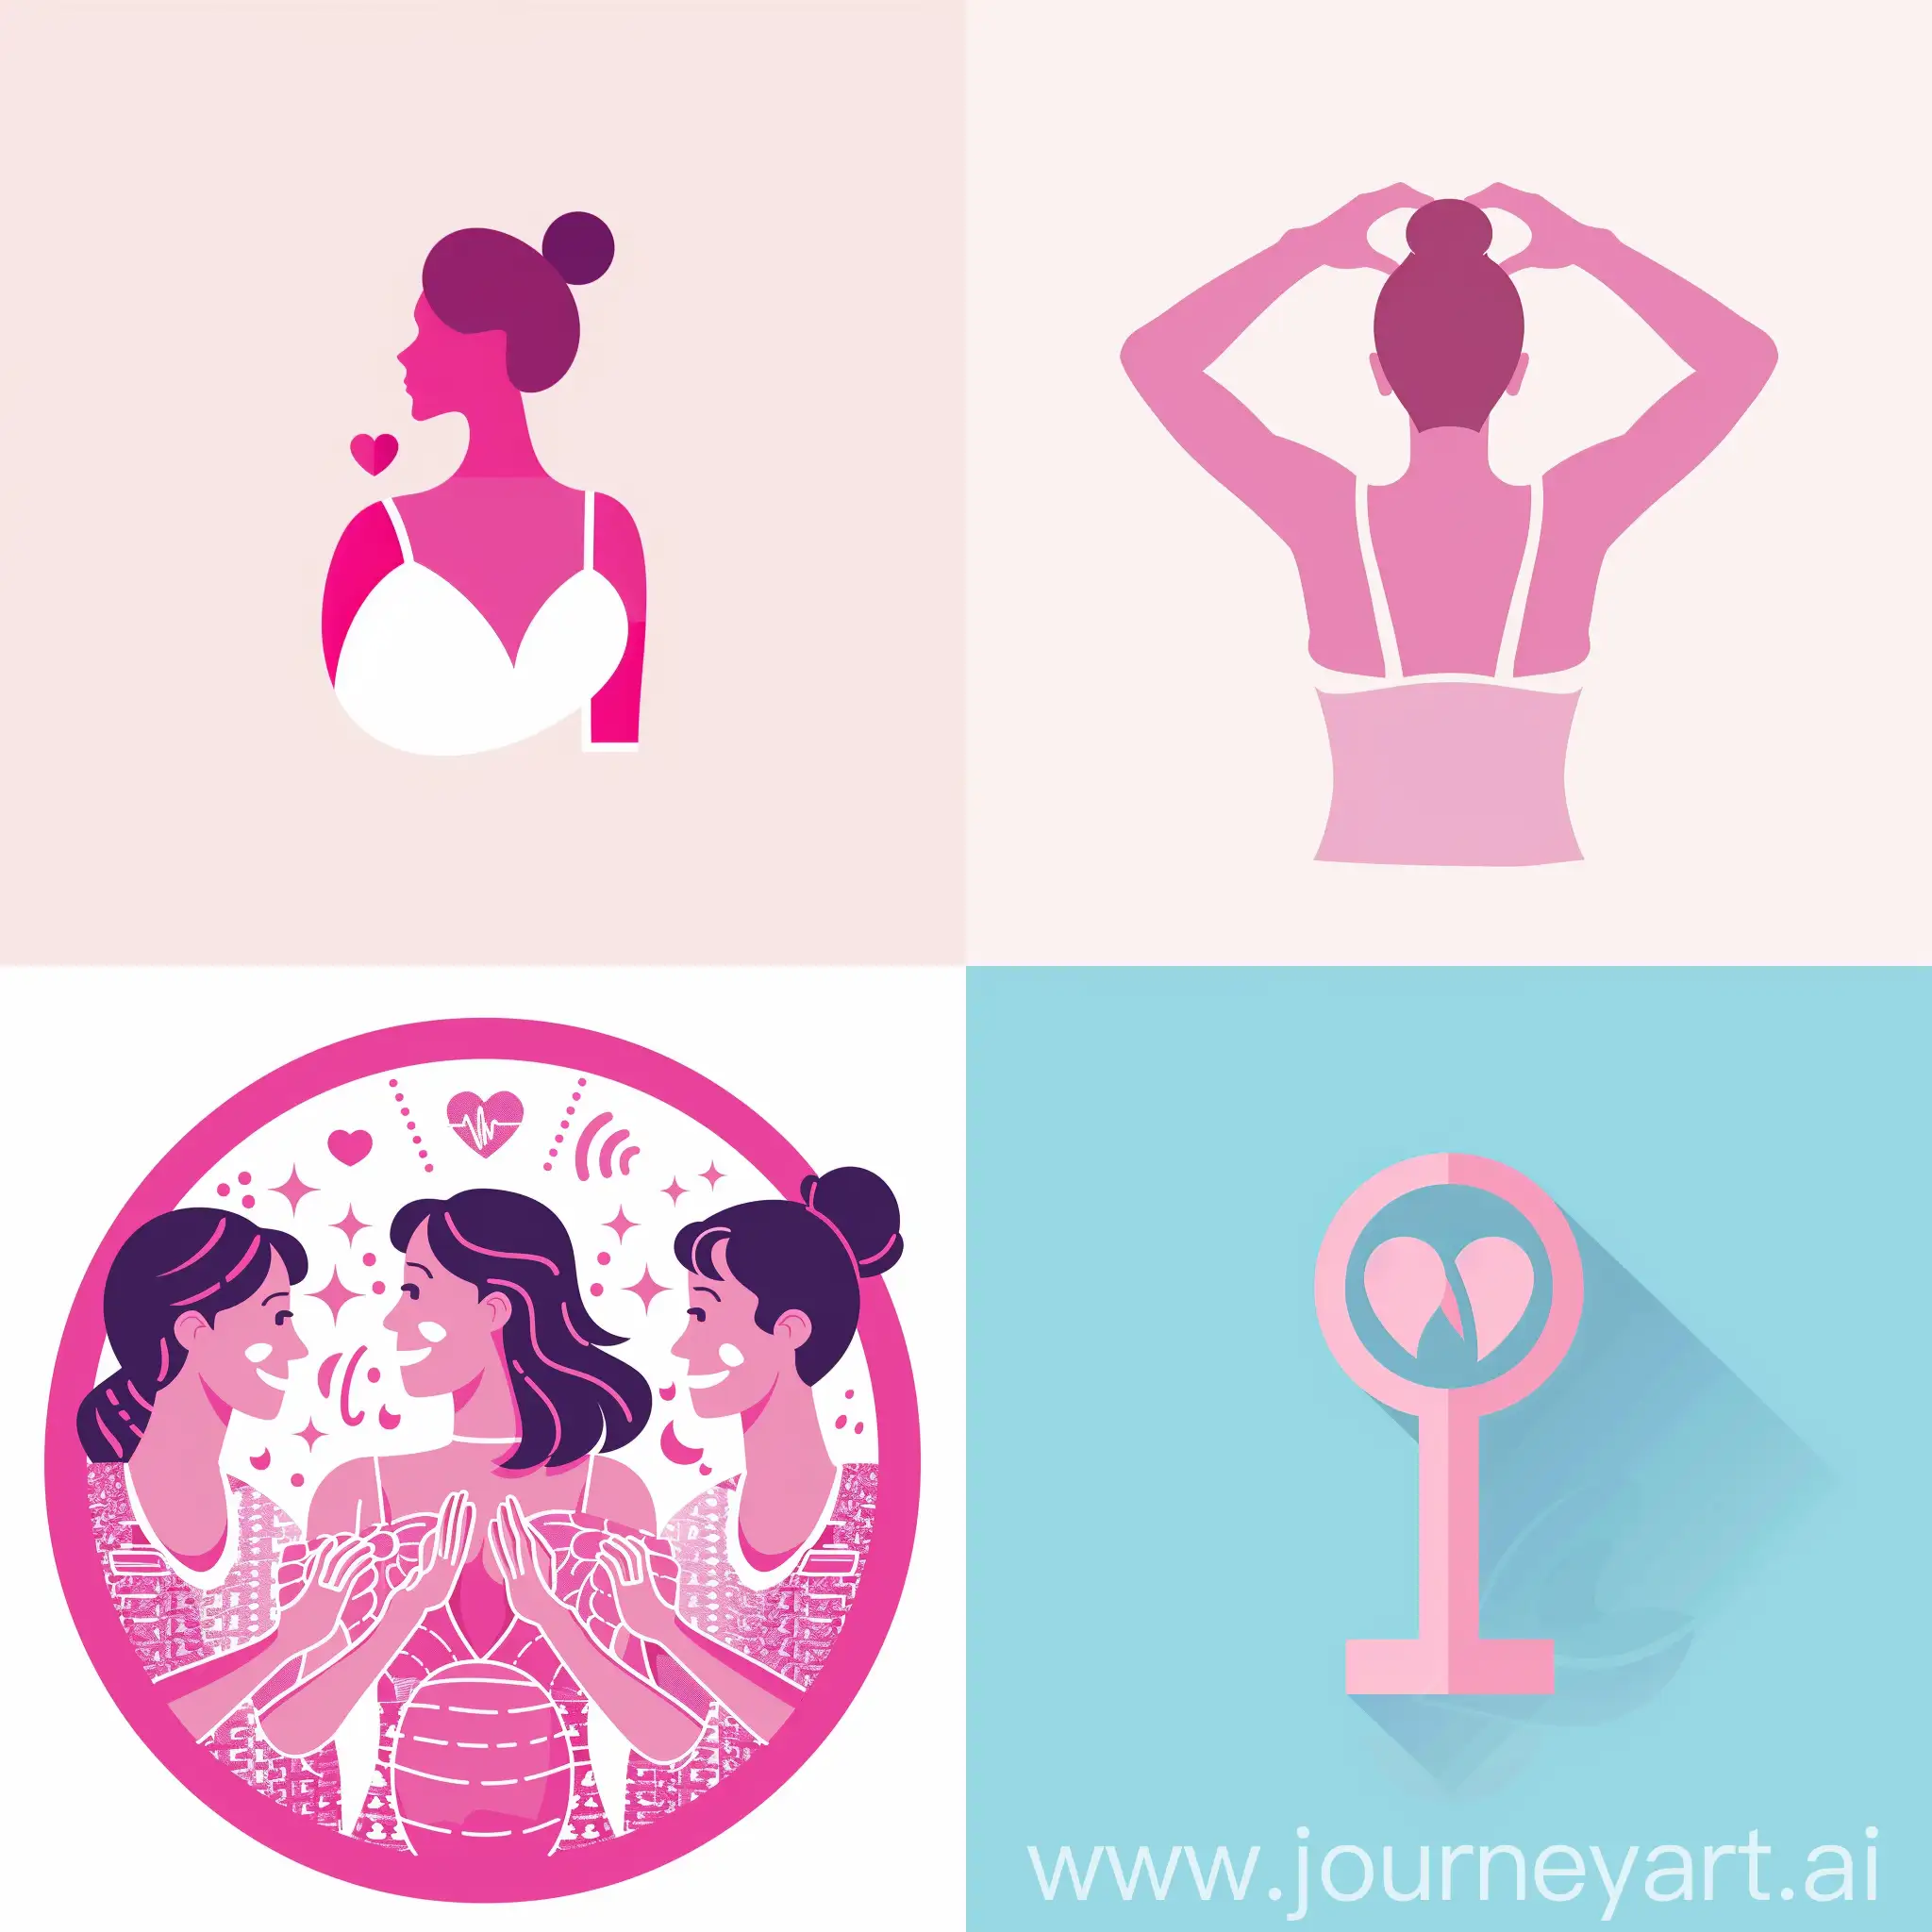 Womens-Breast-SelfExamination-for-Prevention-in-Pink-Minimalist-Vector-Art